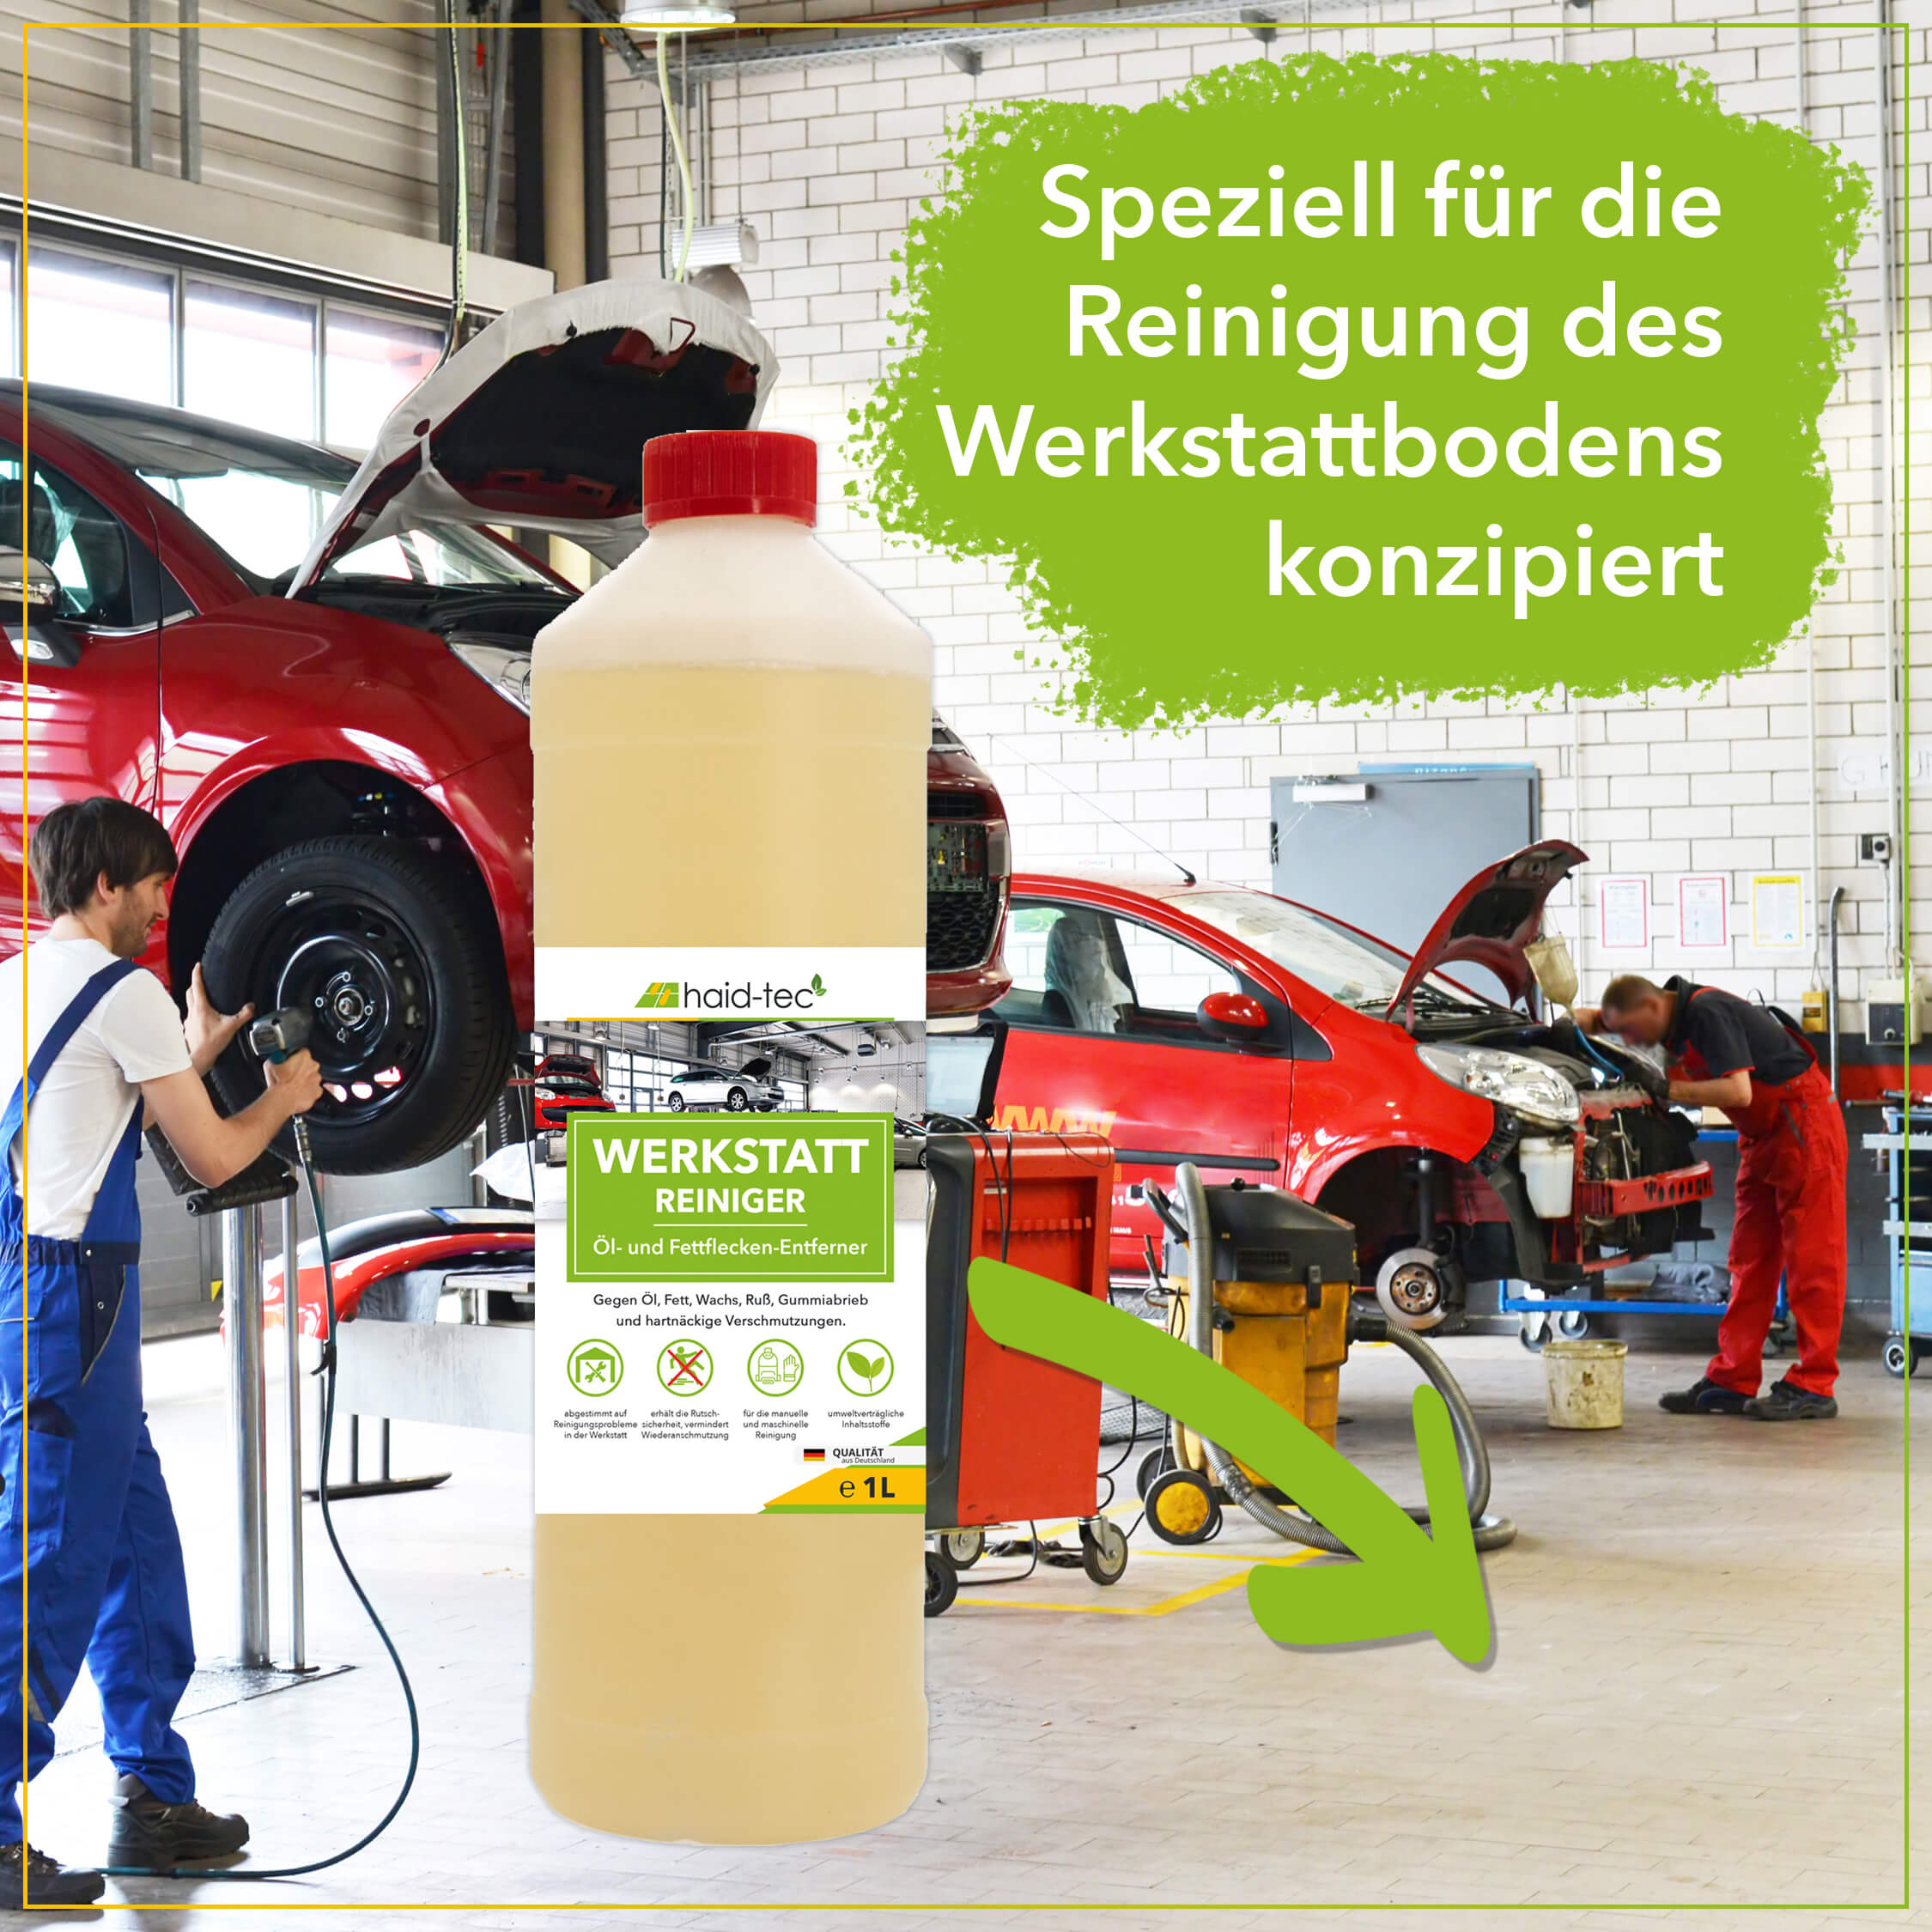 haid-tec Workshop cleaner 5 L, oil stain remover, industrial cleaner - concentrate - biodegradable - made in Germany